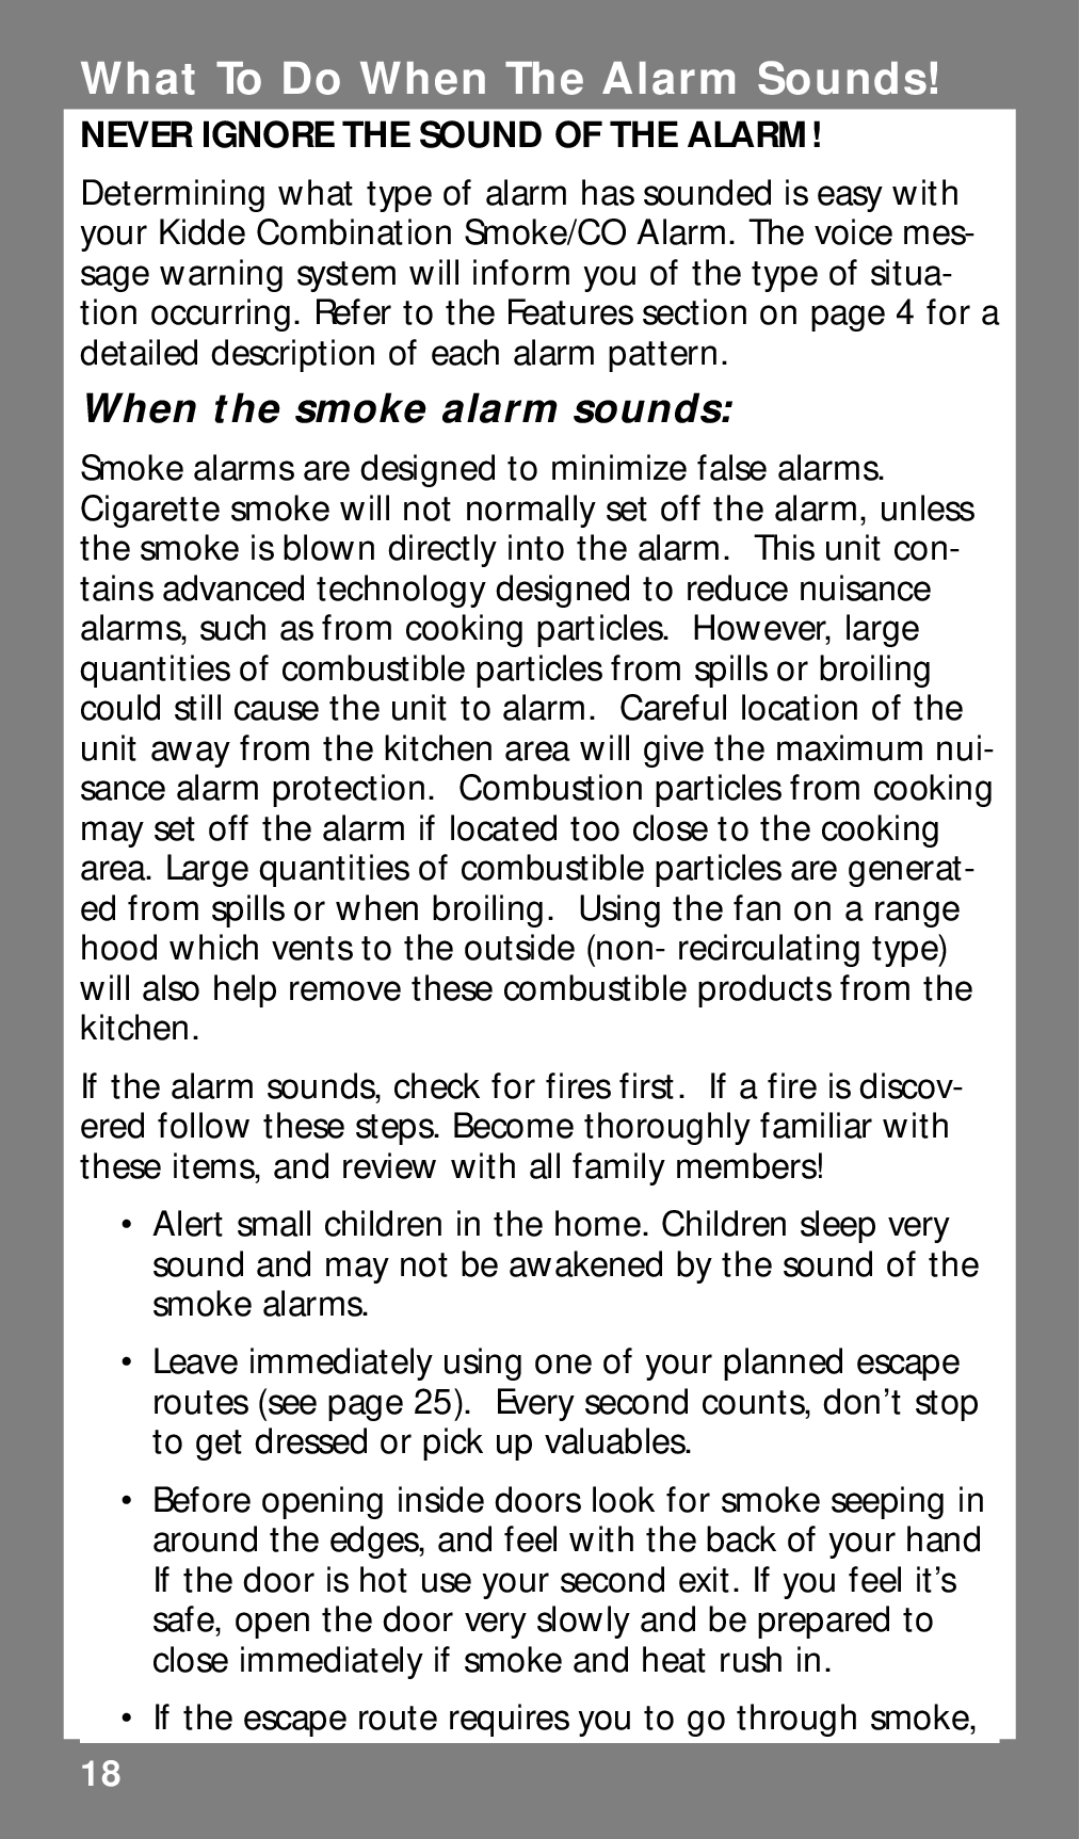 Kidde KN-COSMXTR-B What To Do When The Alarm Sounds, When the smoke alarm sounds, Never Ignore The Sound Of The Alarm 